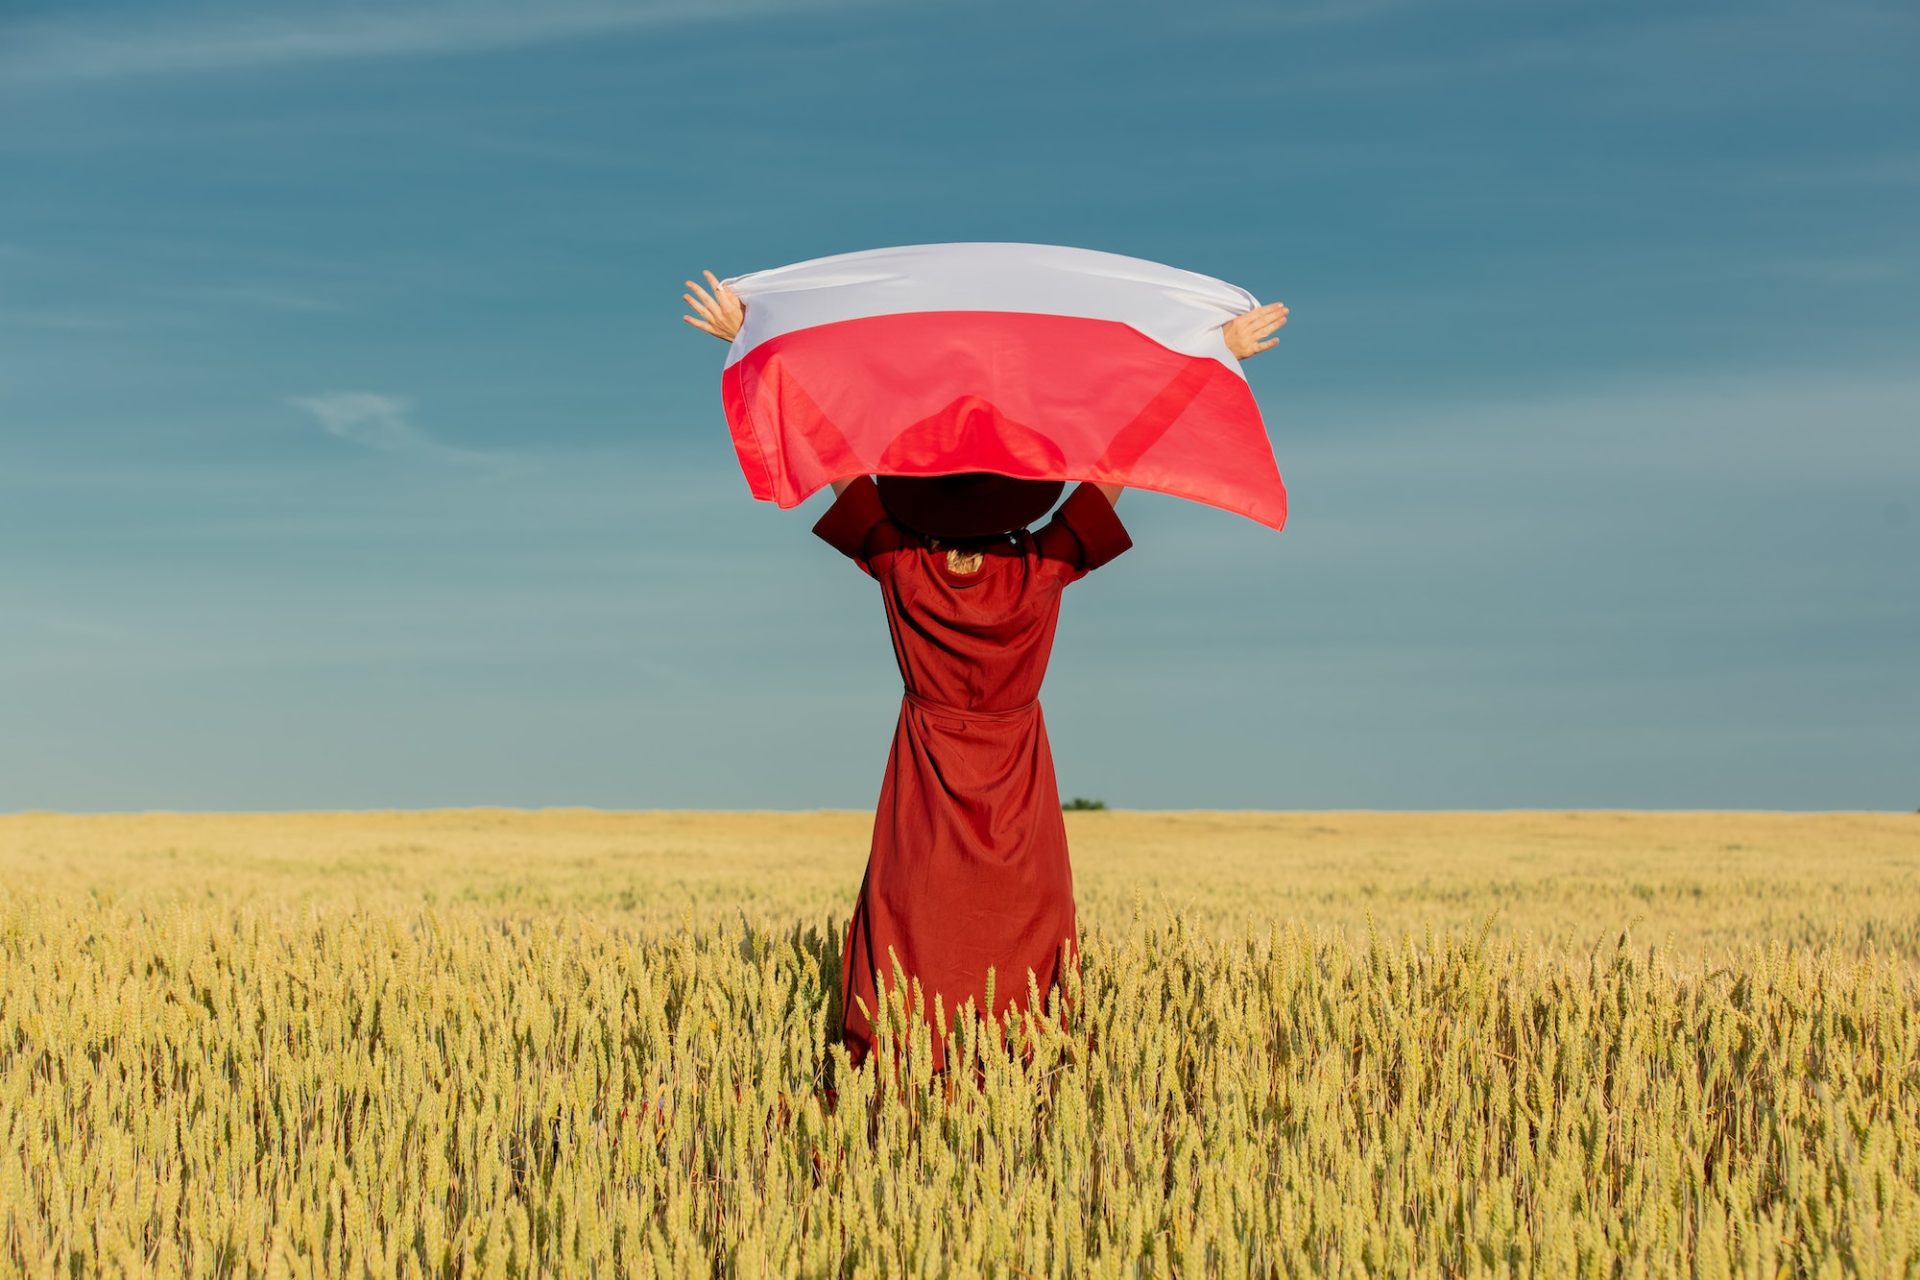 Girl with Poland flag in wheat field and blue sky on background